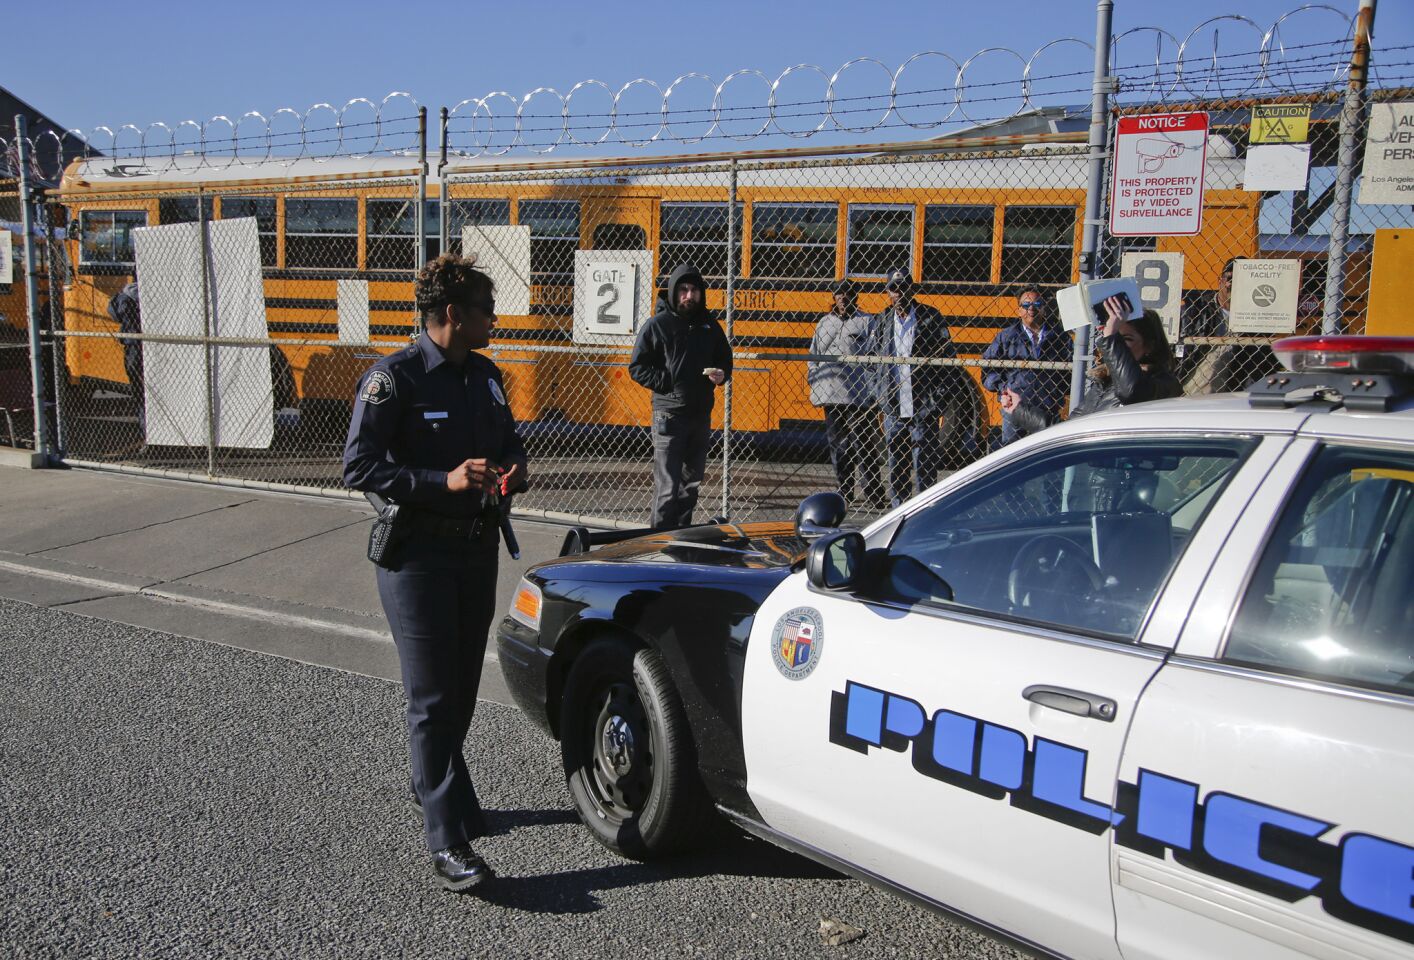 A Los Angeles School Police officer checks in with officials at the LAUSD's Gardena garage, where school buses are parked Dec. 15 as officials investigate a threat against the district.